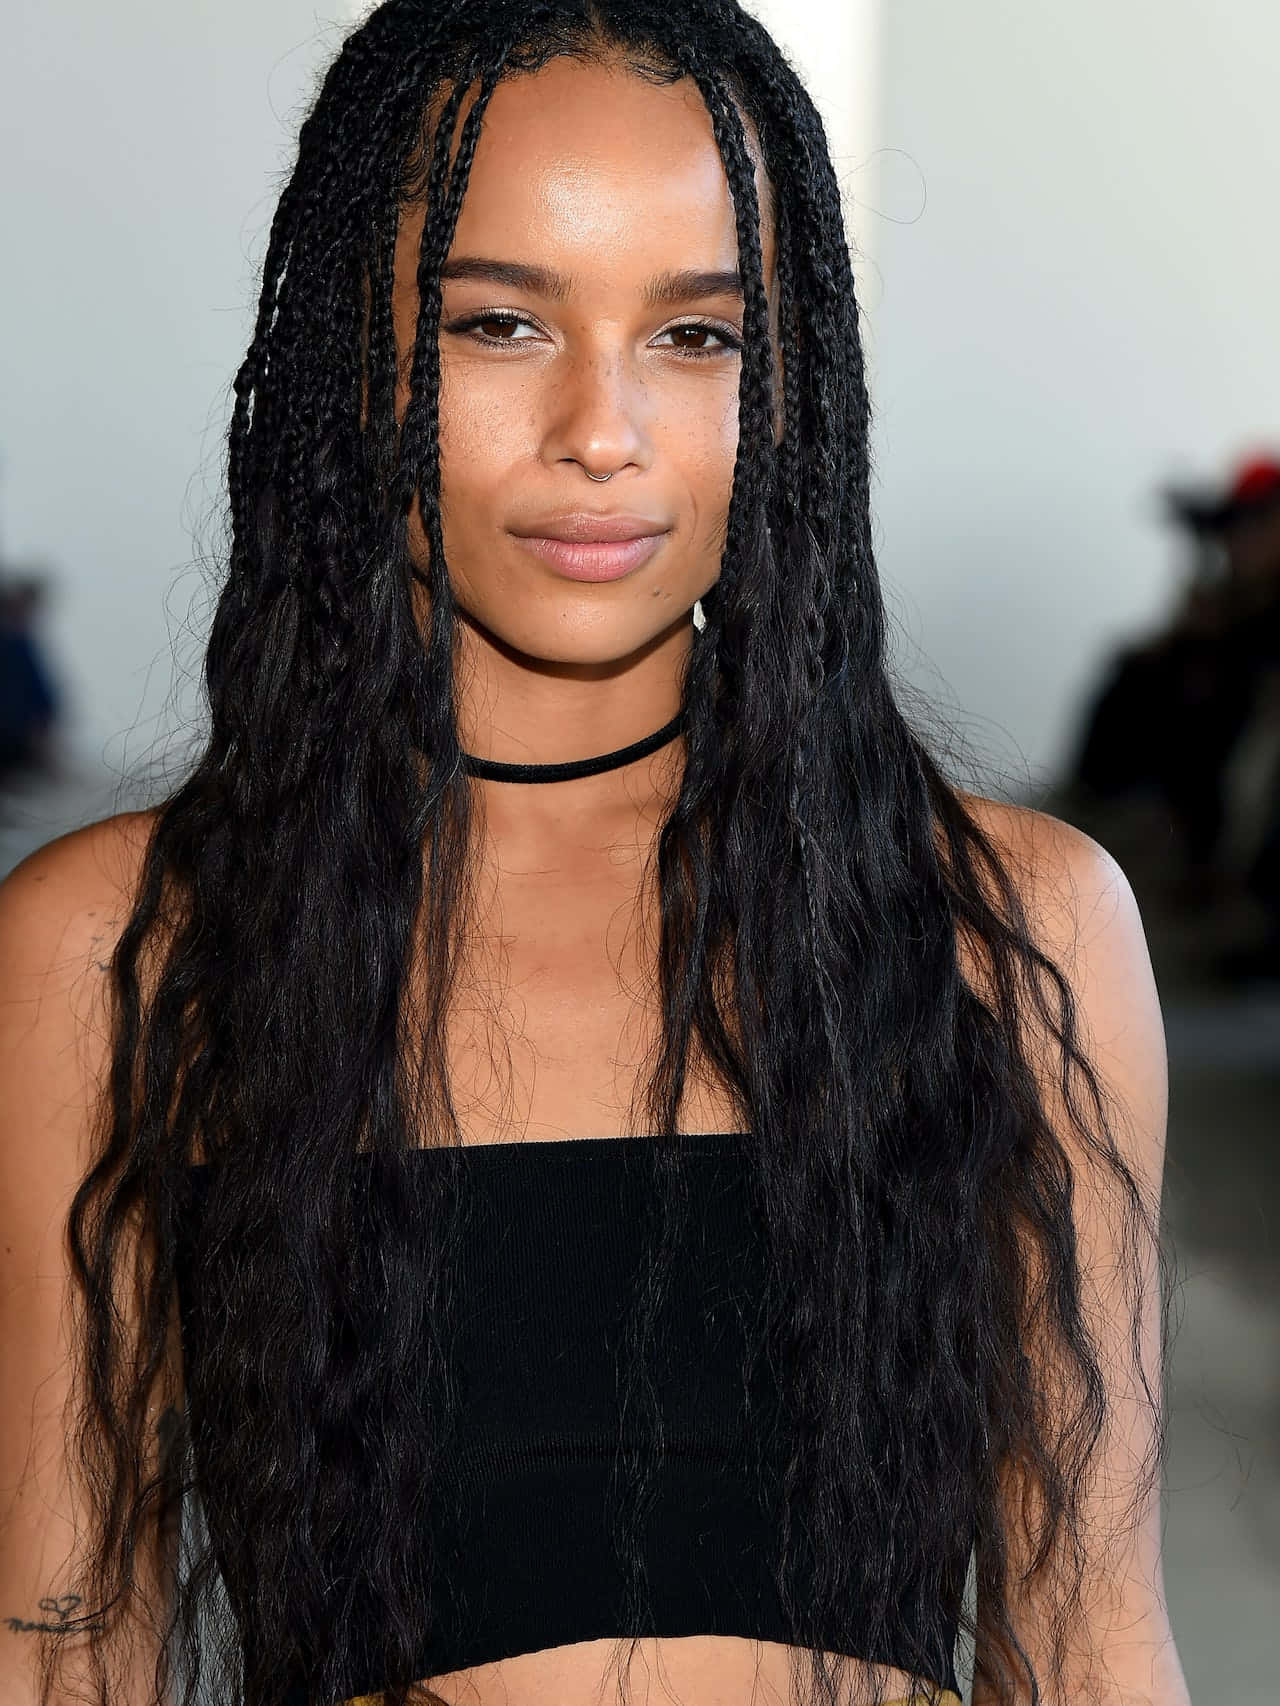 "Stunning Box Braids Hairstyle 2021 Showcased by Chic Woman in High-Res Photo"